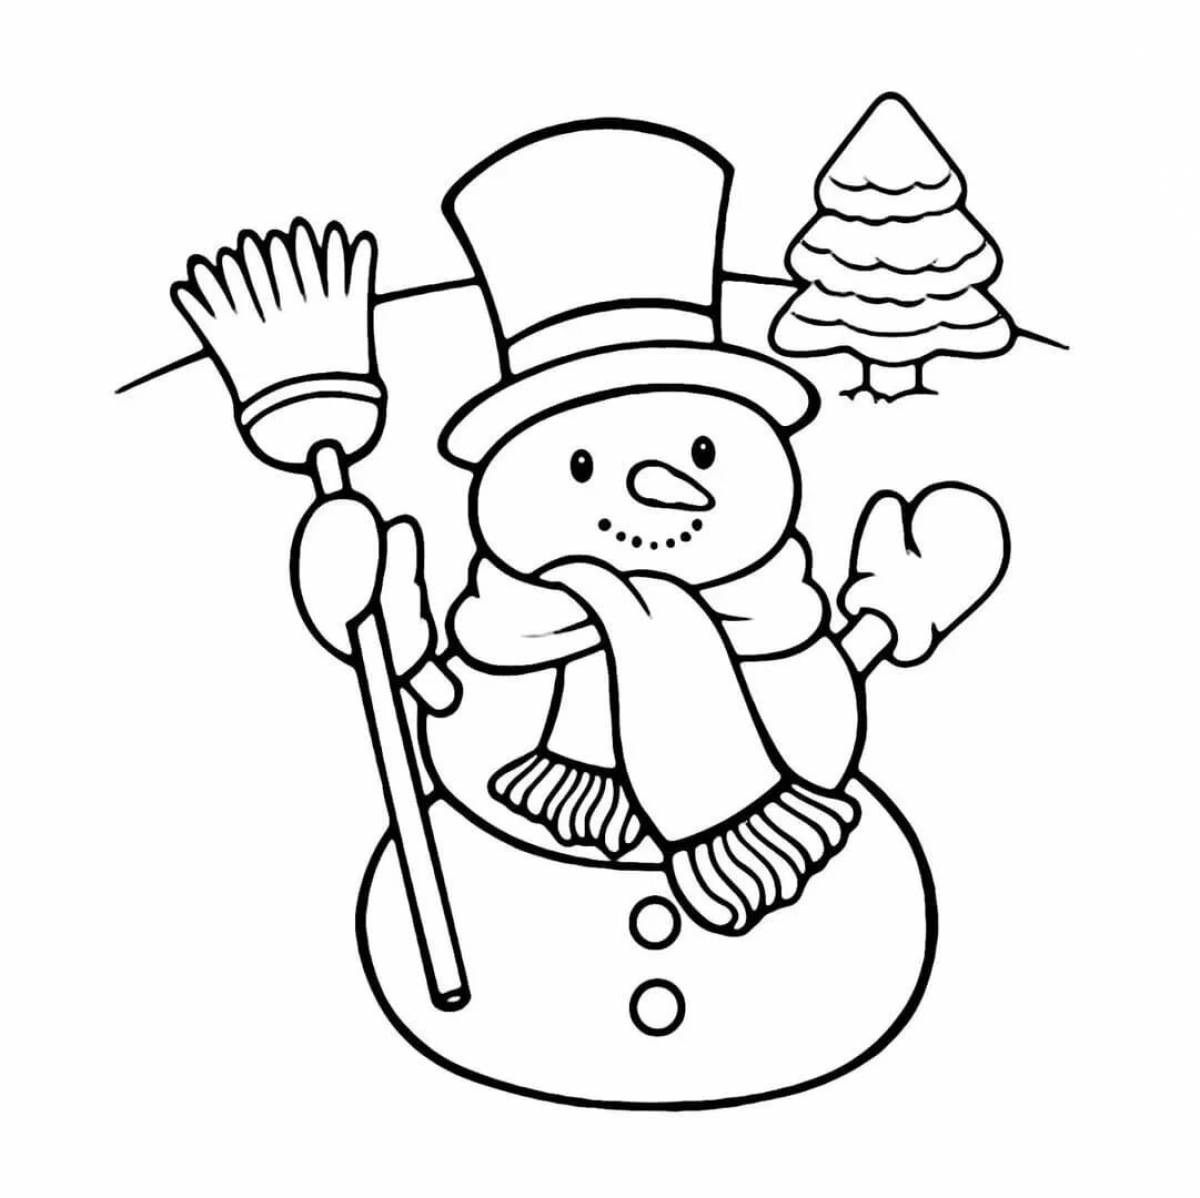 Snowman drawing for kids #3